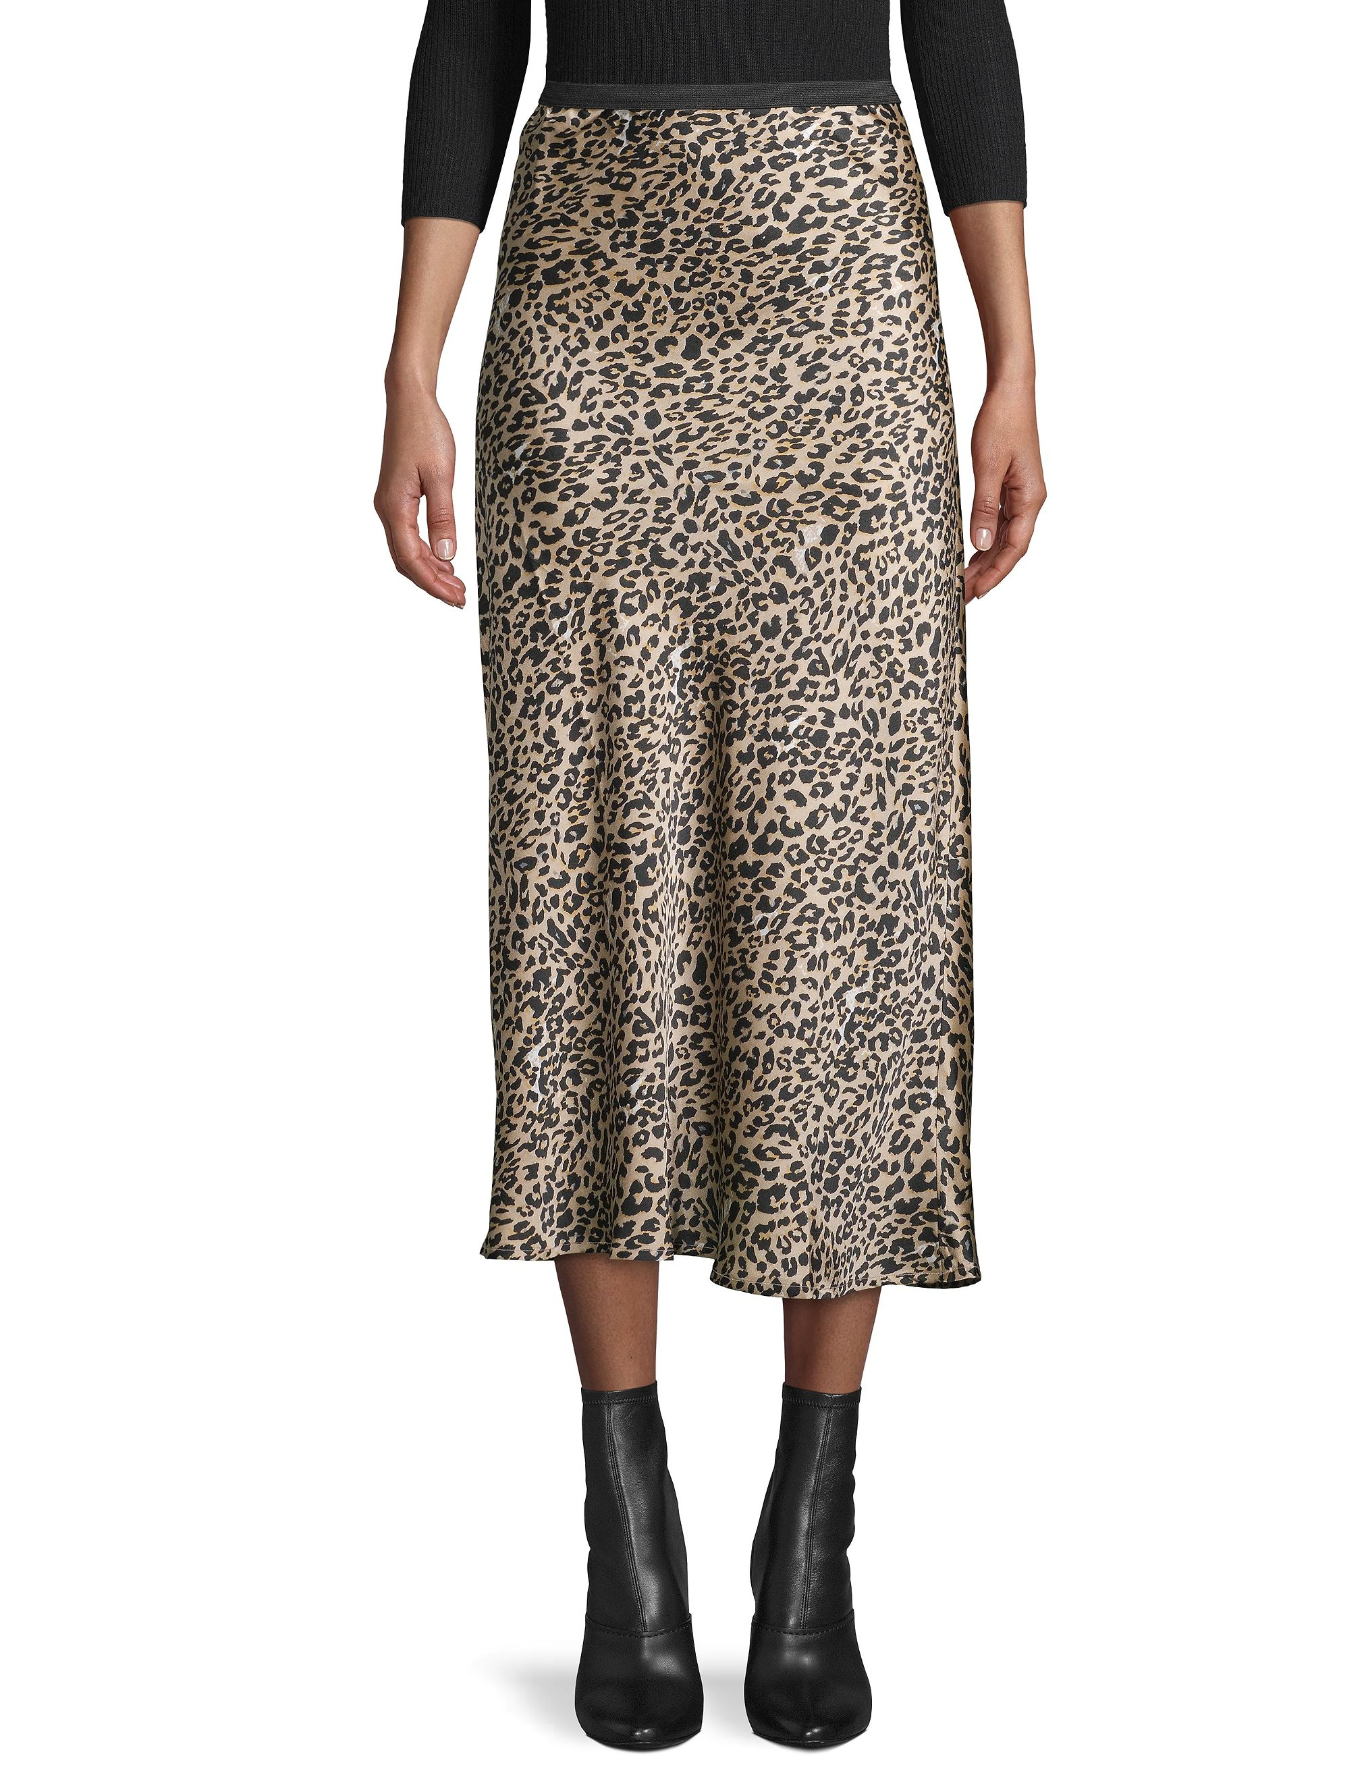 Kate Middleton's Zara leopard skirt may be sold out, but chic ...